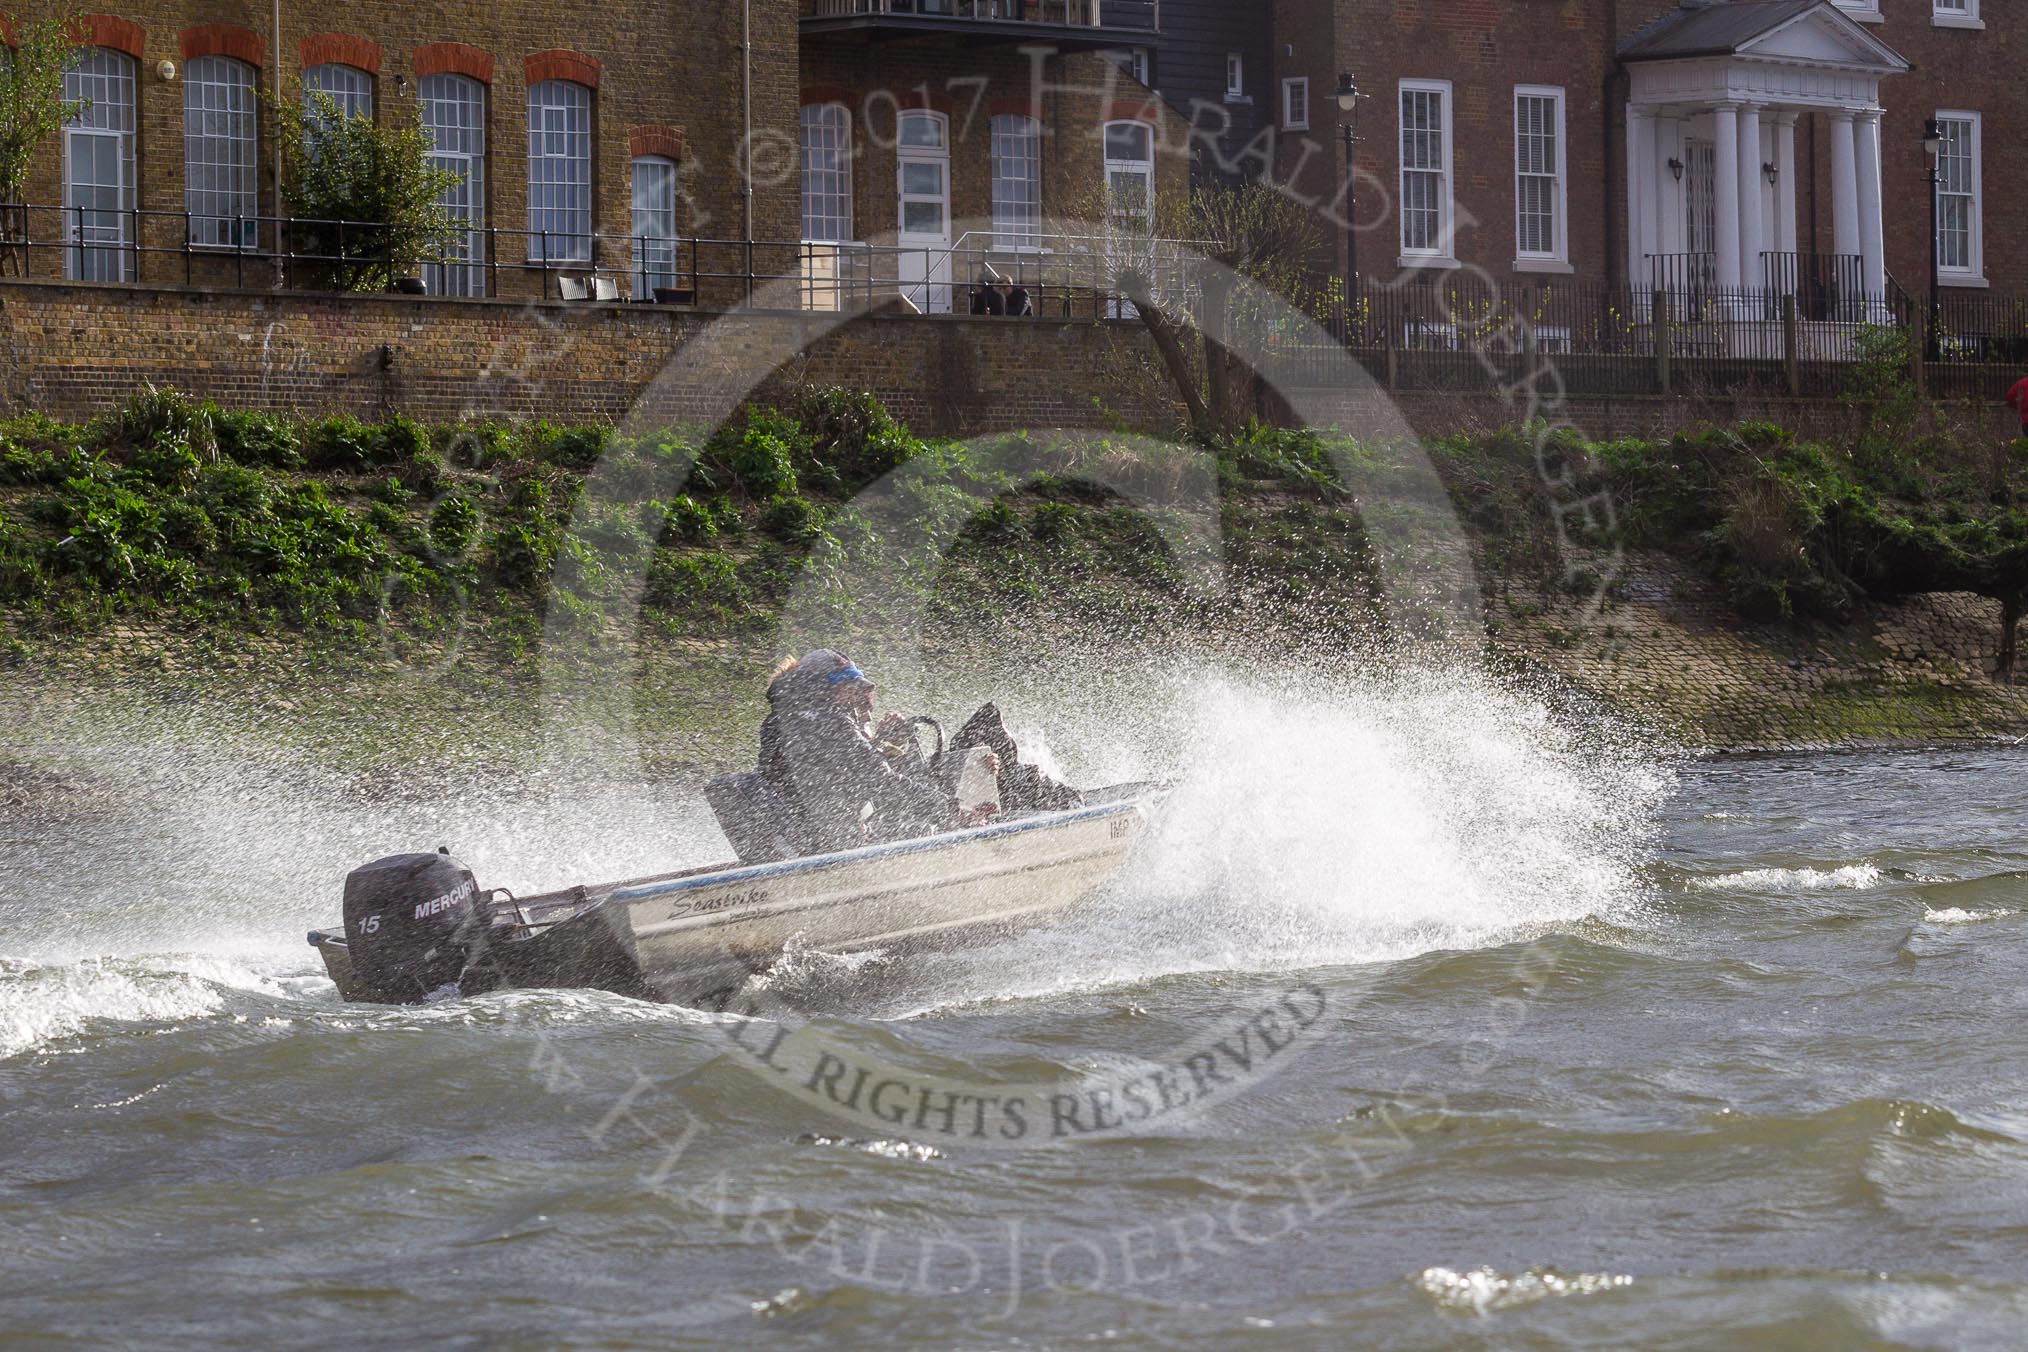 The Cancer Research UK Boat Race season 2017 - Women's Boat Race Fixture OUWBC vs Molesey BC: A coaches tin boat in very choppy waters.
River Thames between Putney Bridge and Mortlake,
London SW15,

United Kingdom,
on 19 March 2017 at 16:23, image #147